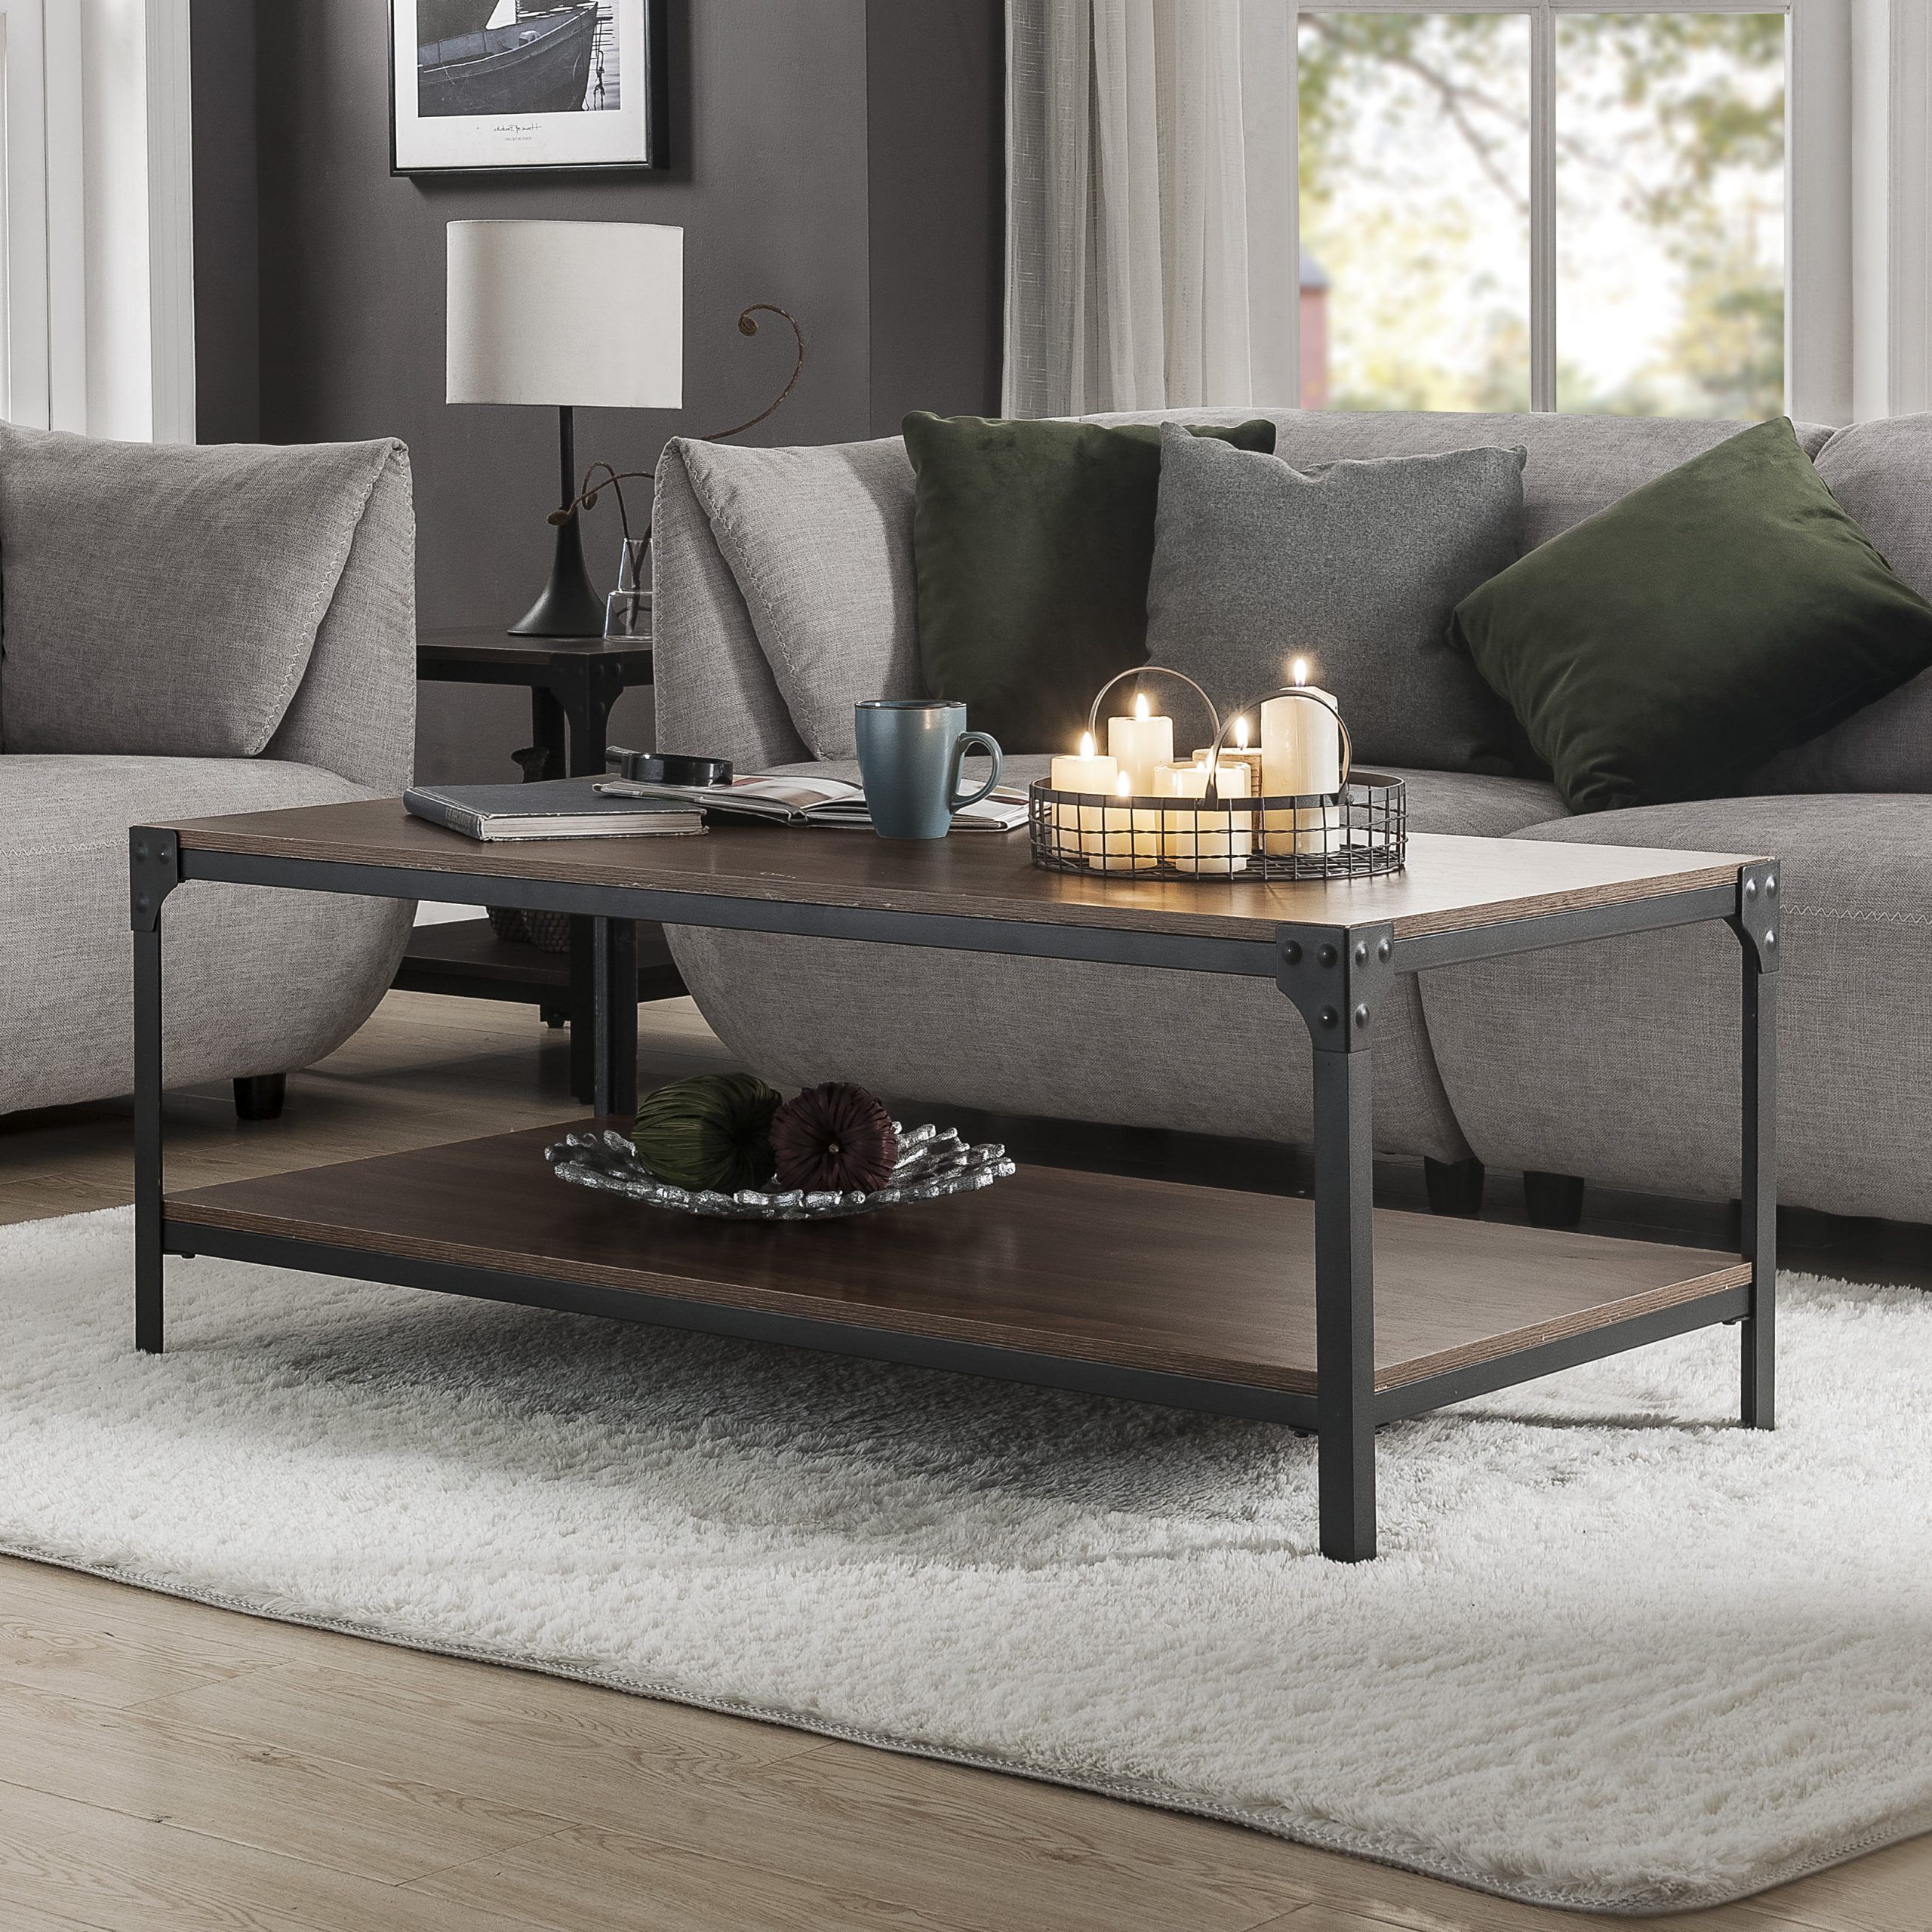 End Tables For Living Room, Mid Century Rustic Coffee Table With With Trendy Metal Side Tables For Living Spaces (View 11 of 15)